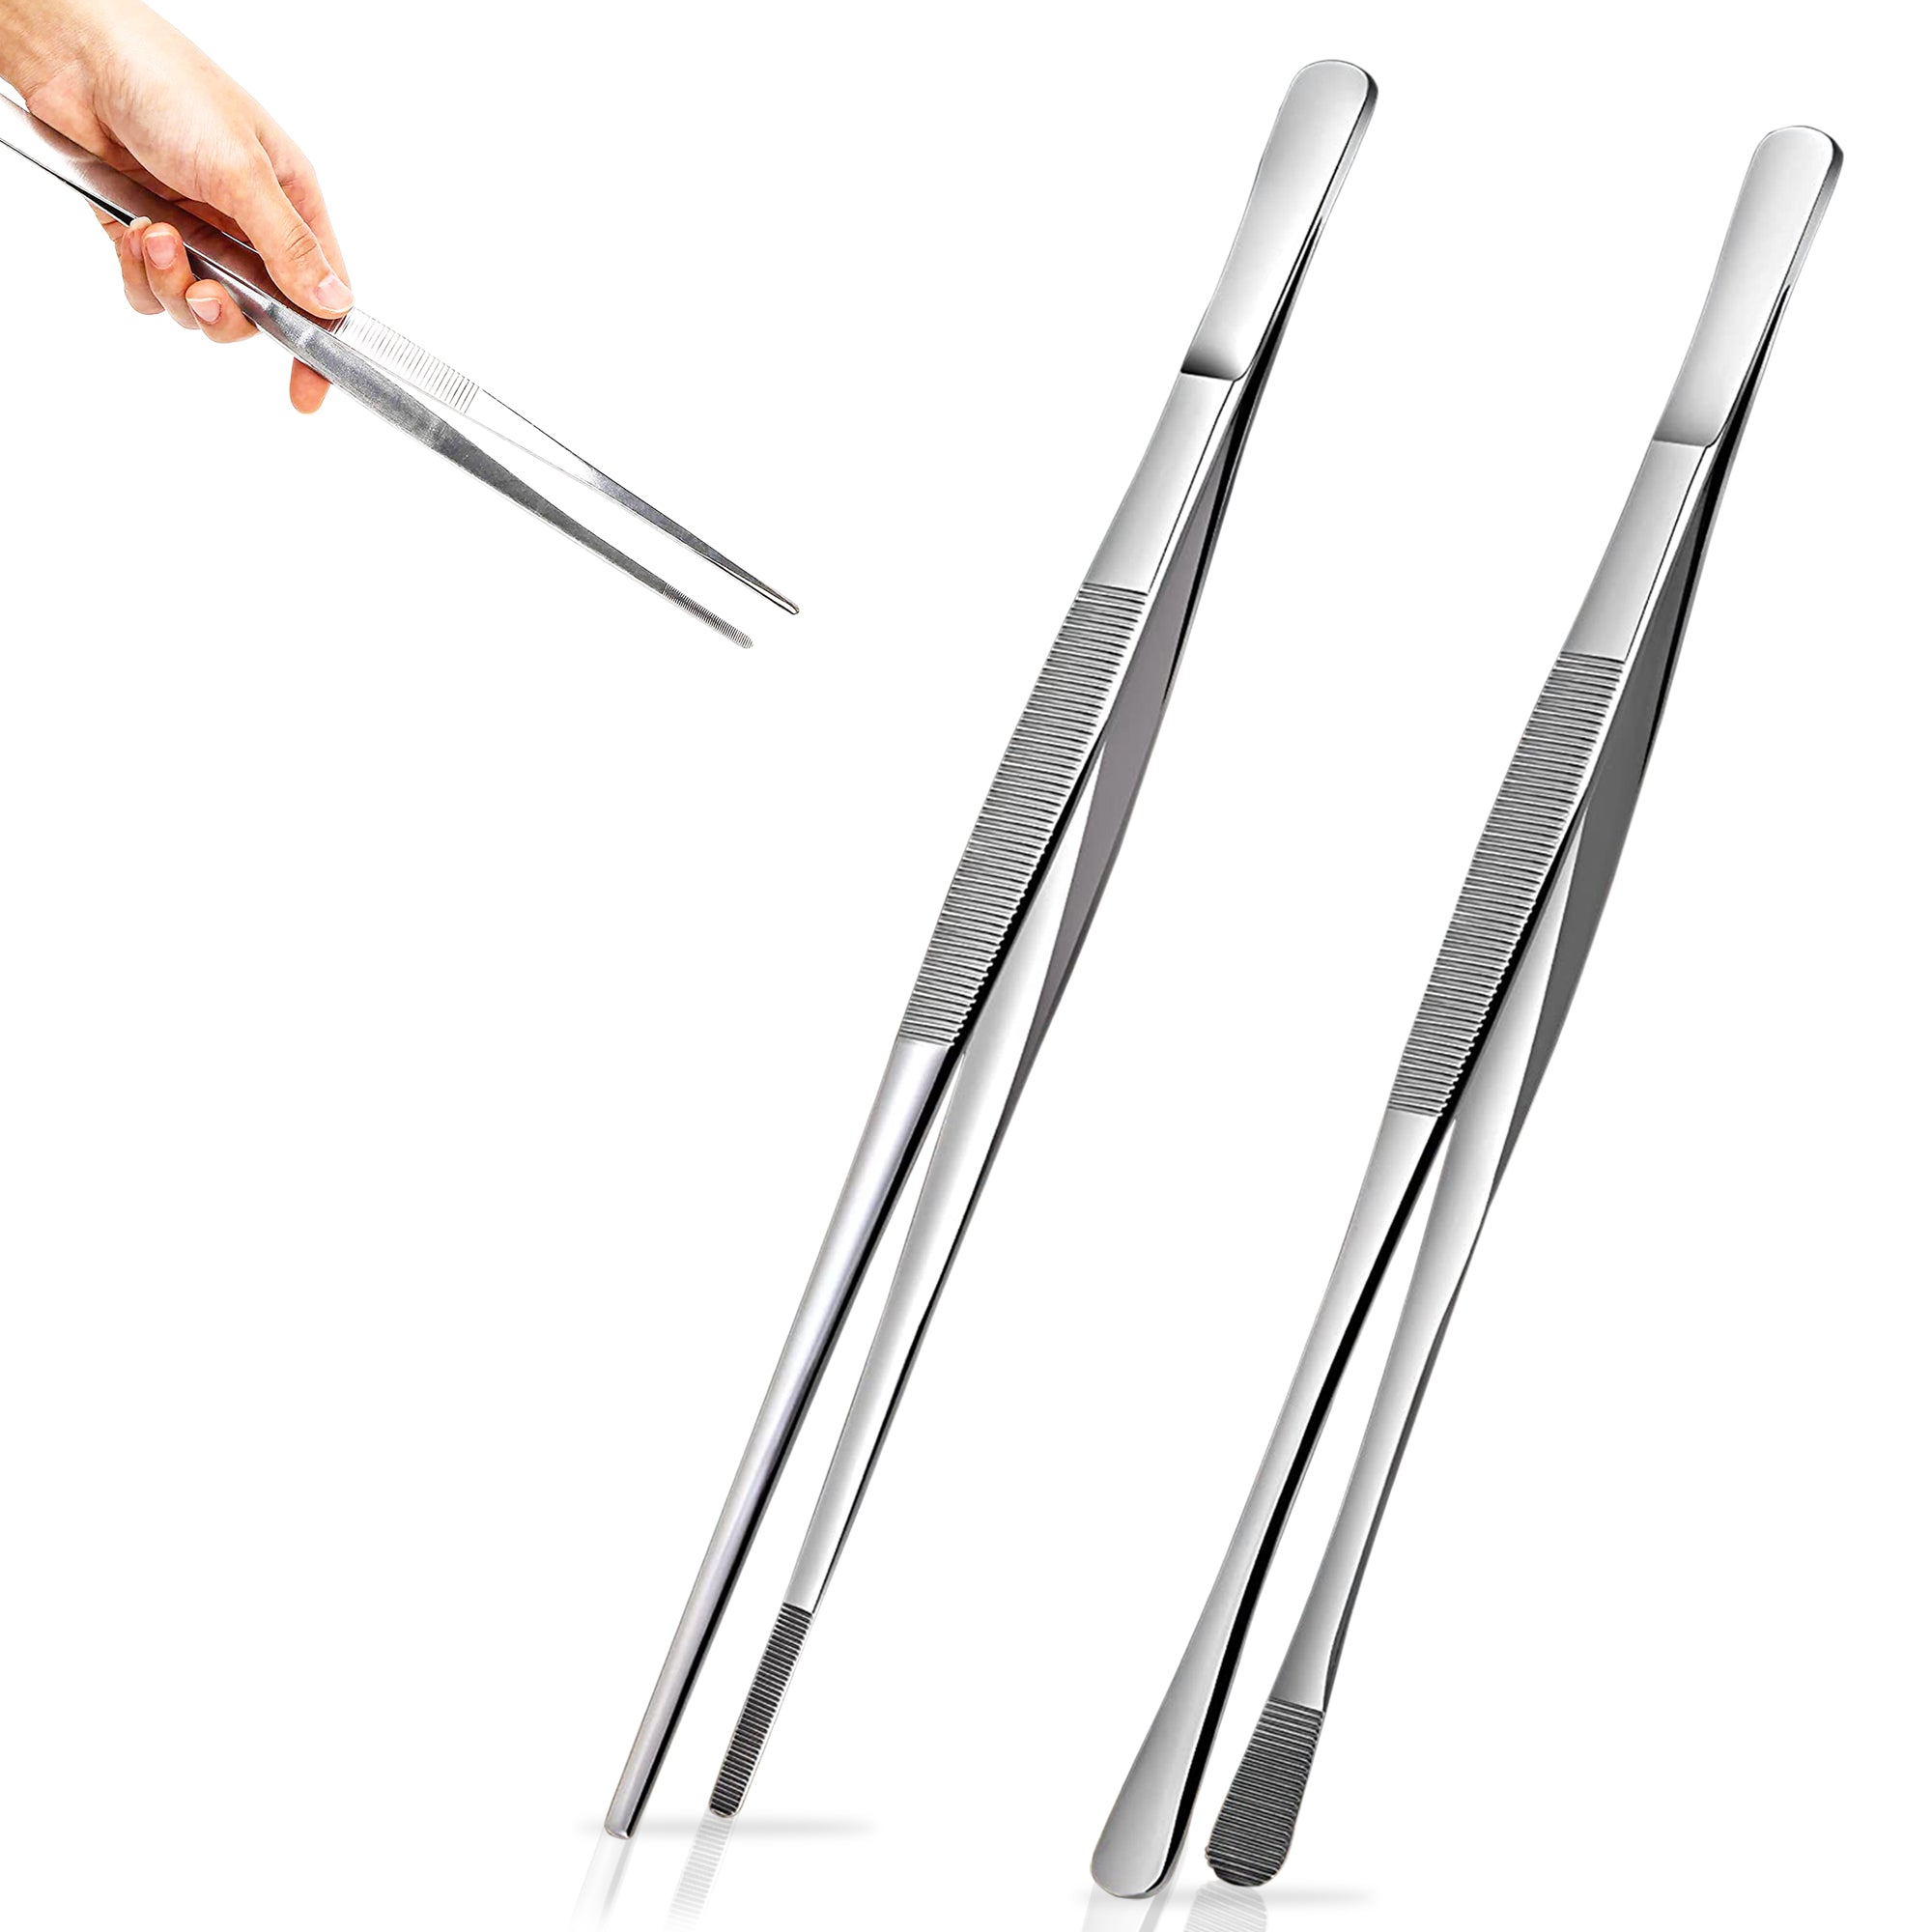 Kitchen Tweezers (x2) – Stainless Steel – 12 Inches Long – Non-Slip – For Cooking, Plating, Serving and Decorating by Ucraft Kitchen. (Thin and thick tip)